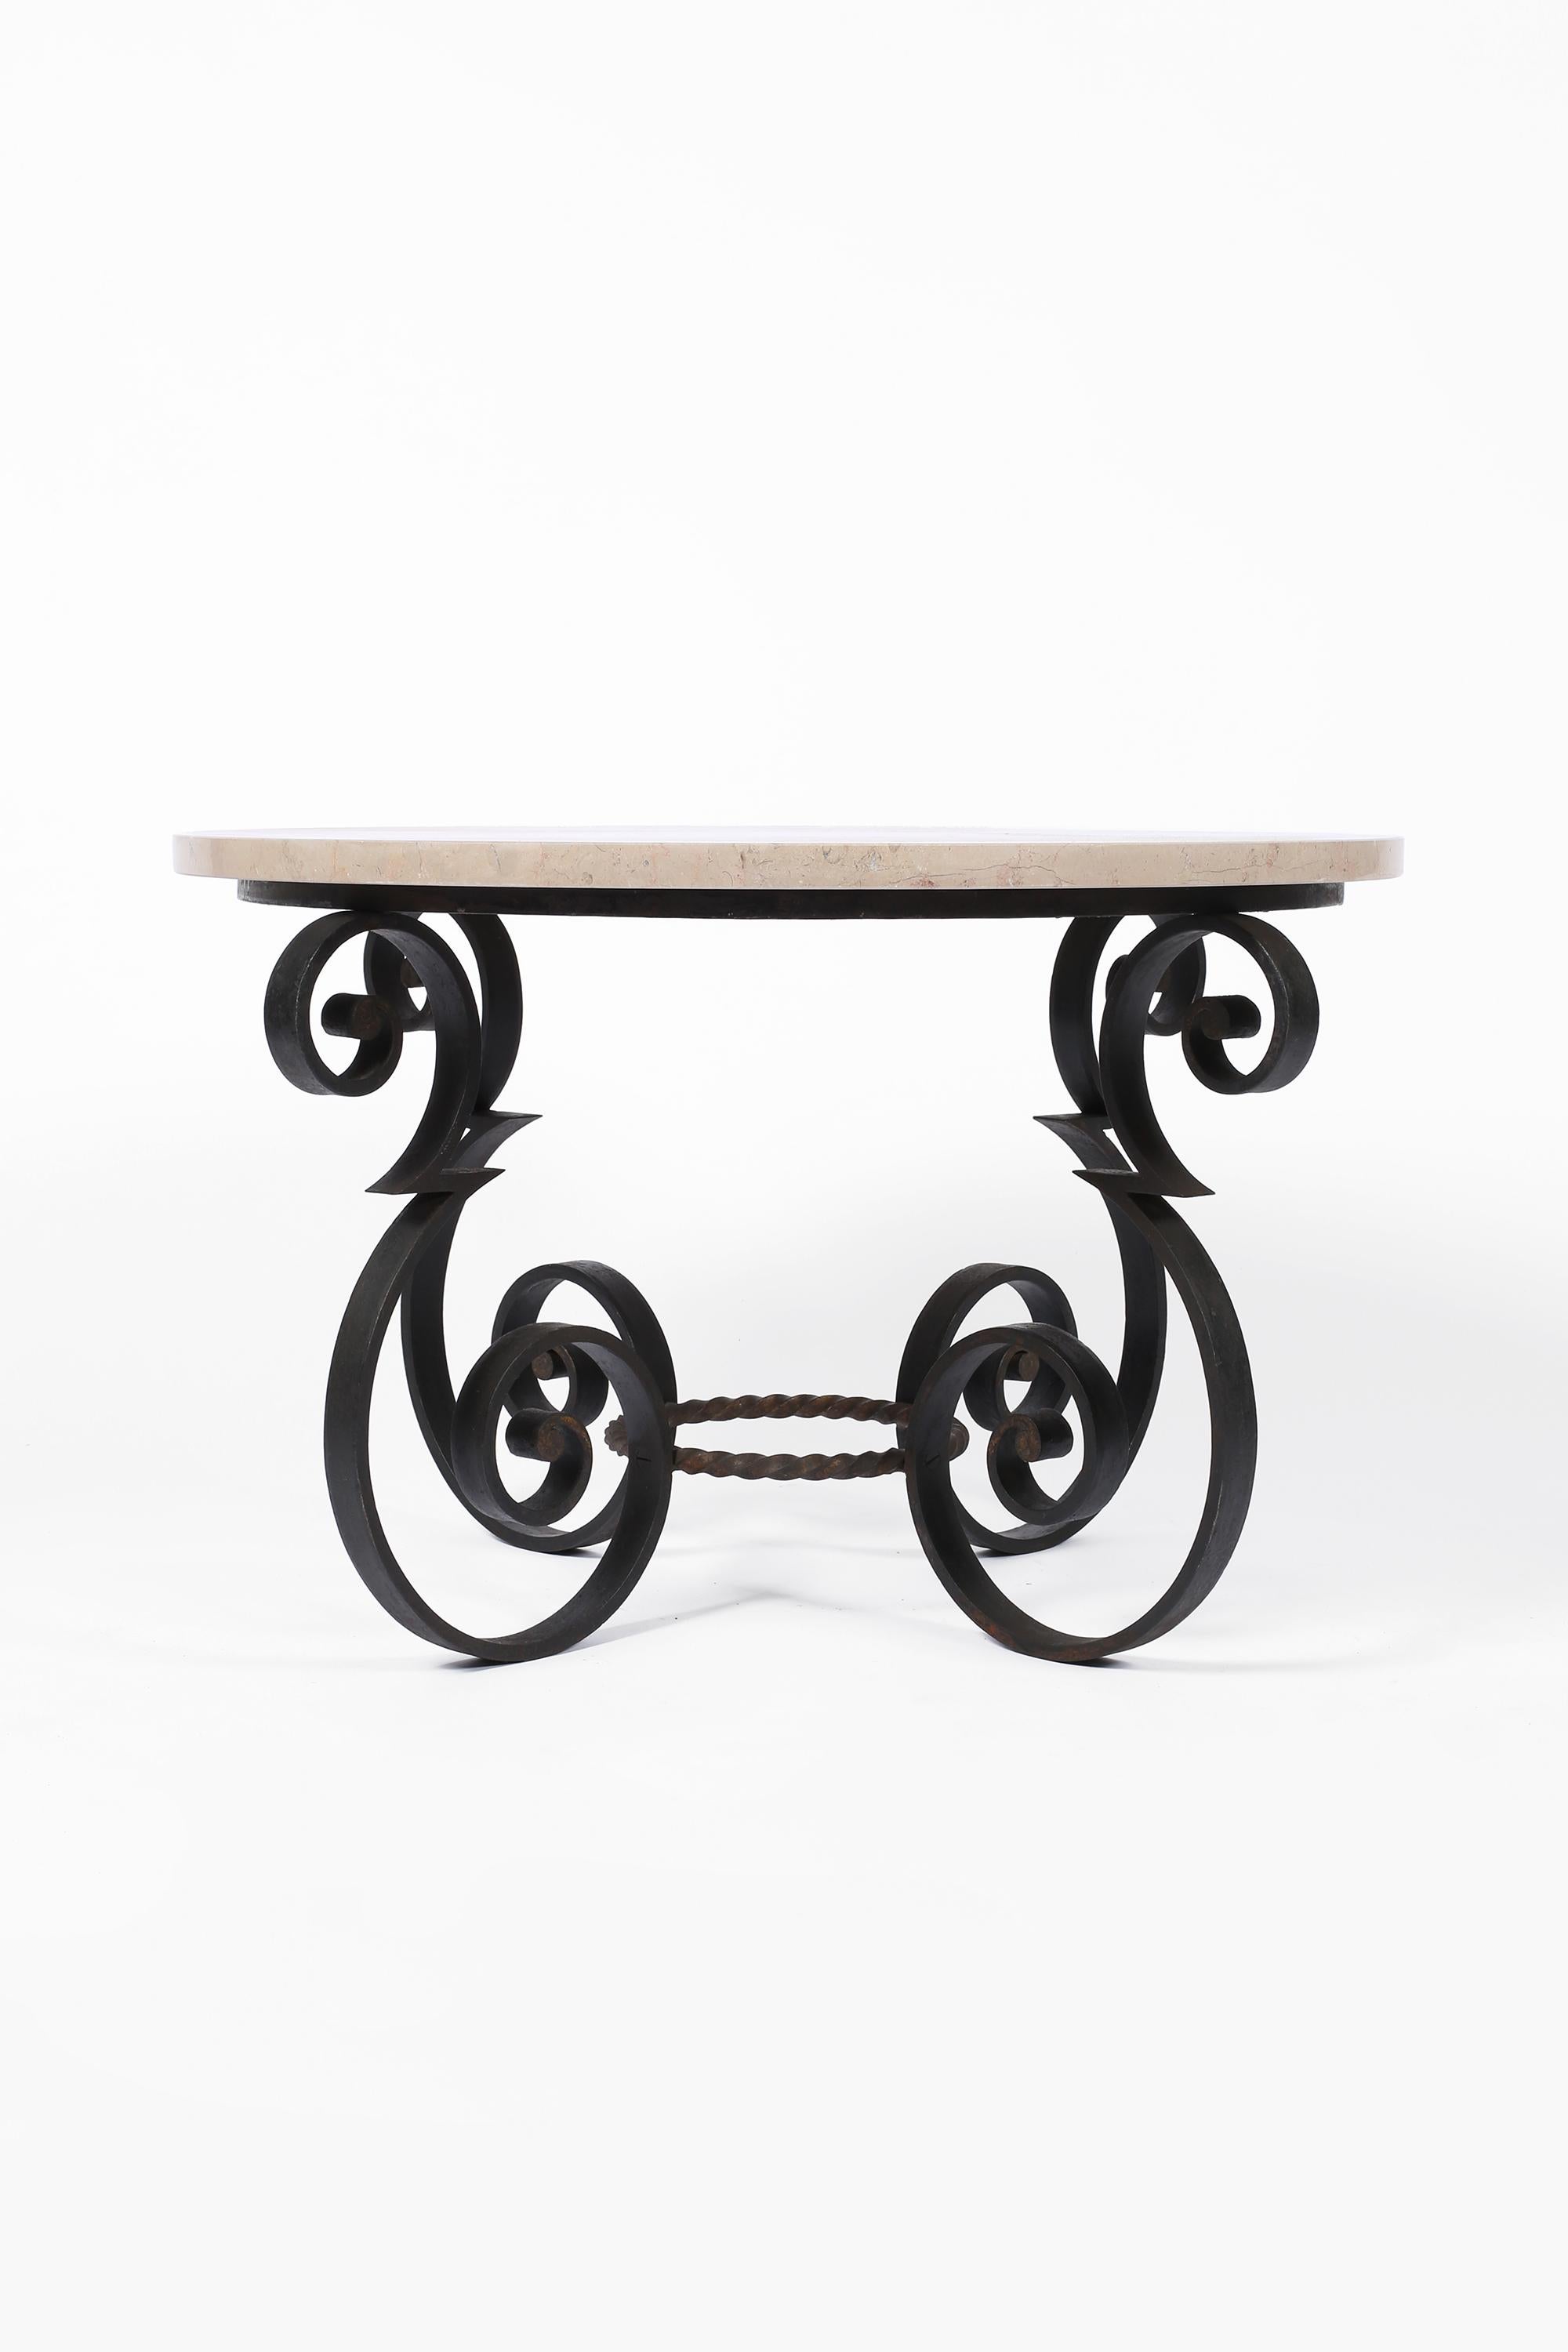 Art Deco French 1930s Forged Iron & Marble Coffee Table in the manner of Poillerat For Sale